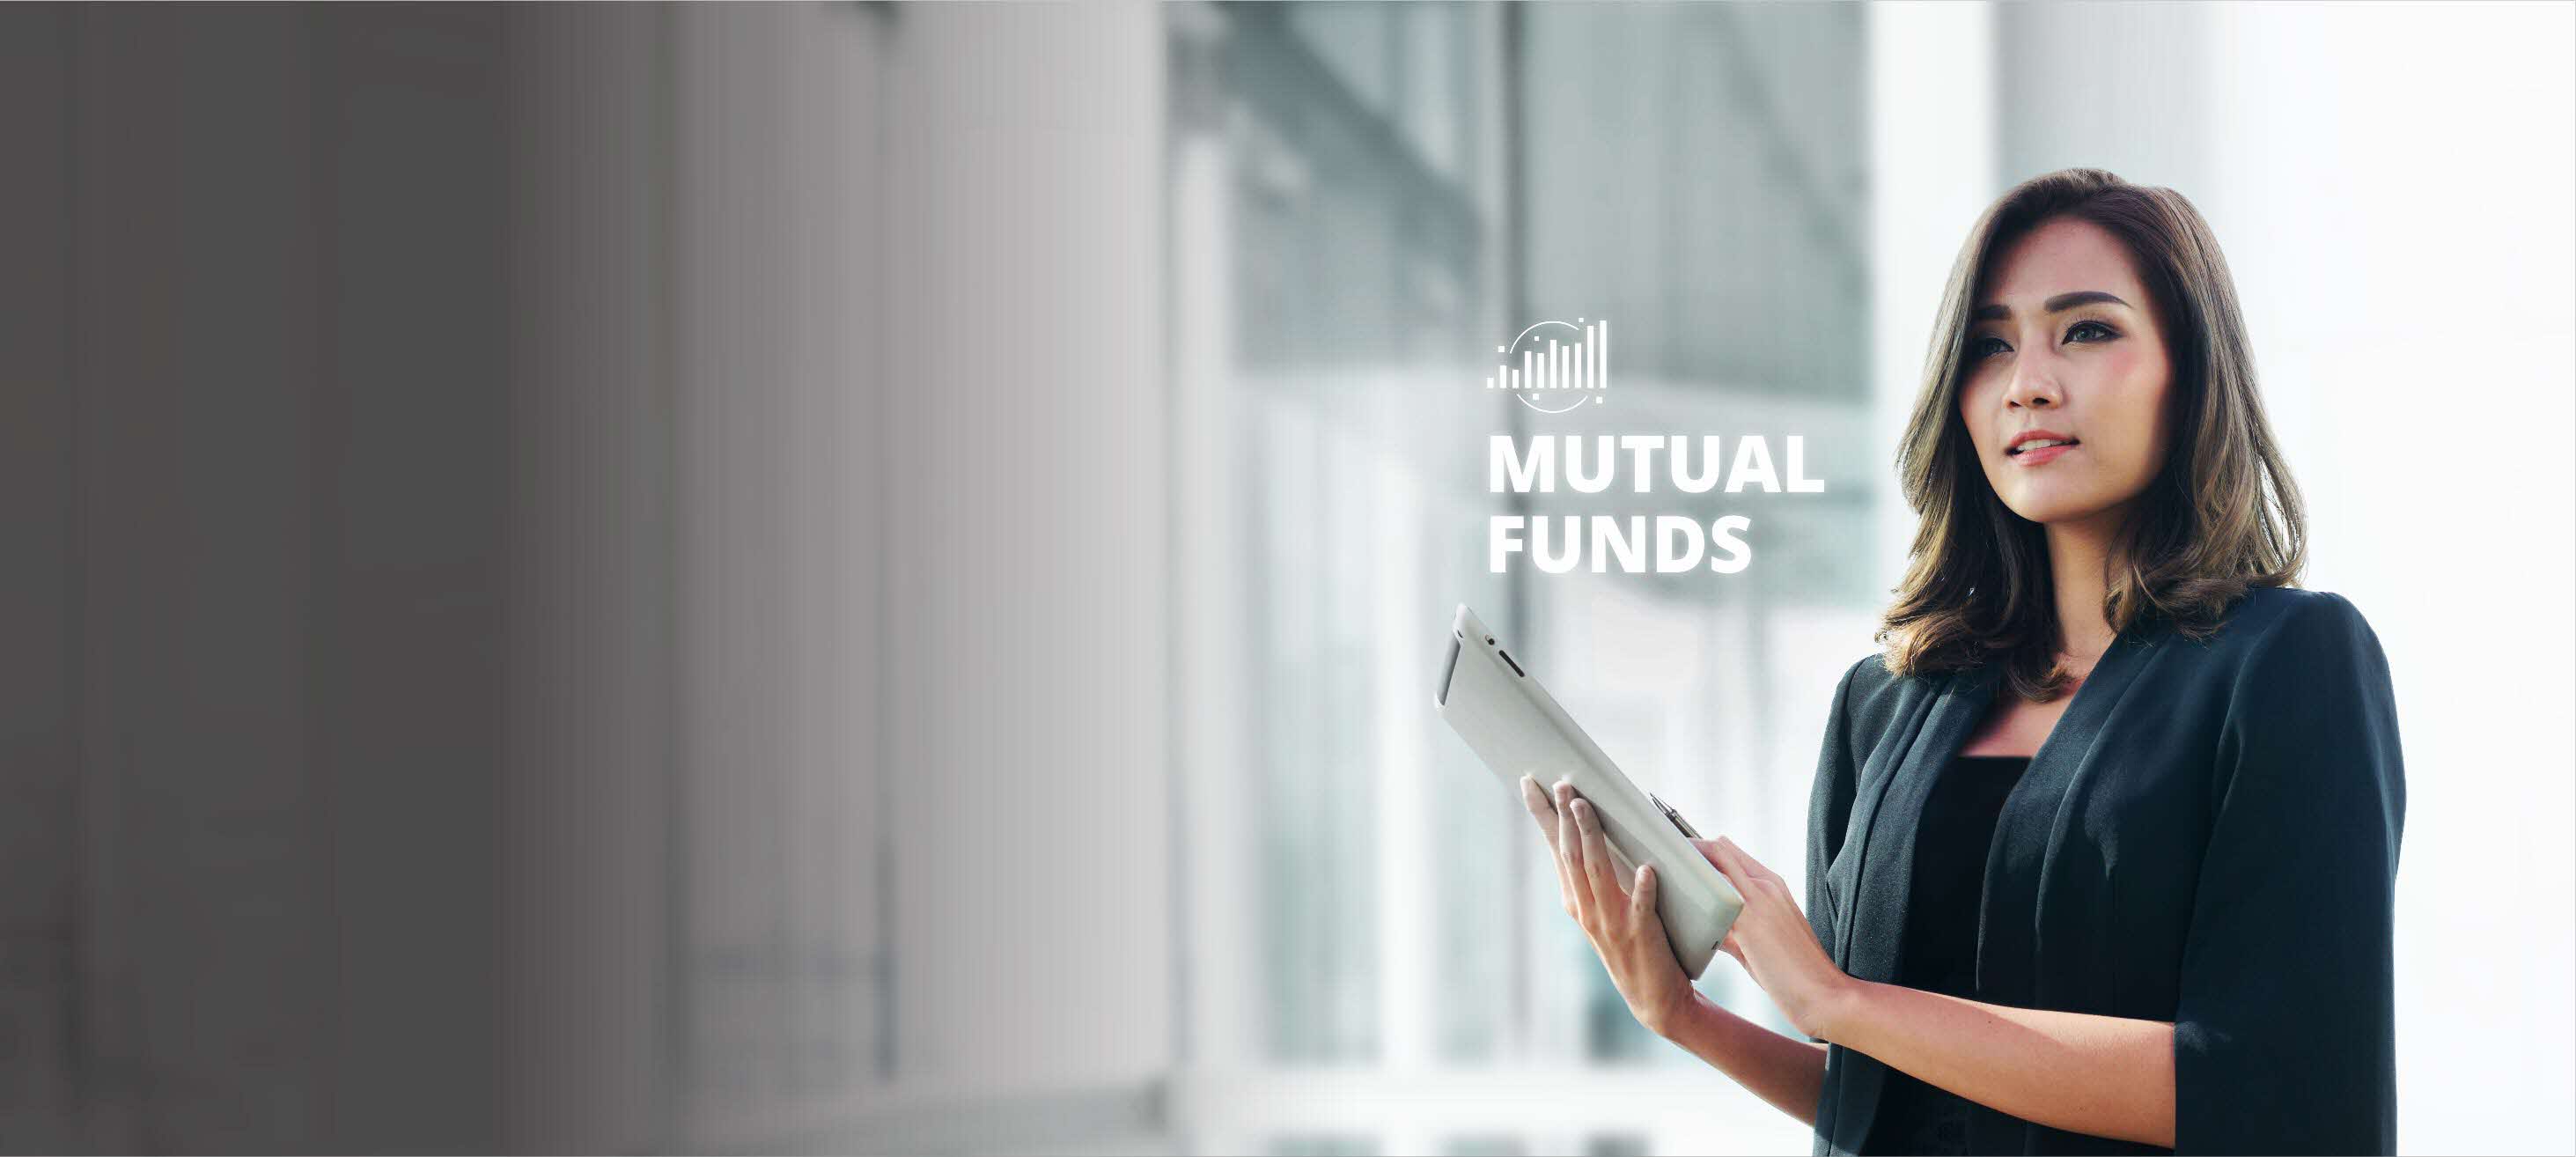 Gain welcome reward up to IDR 17 mio through Mutual Funds investment